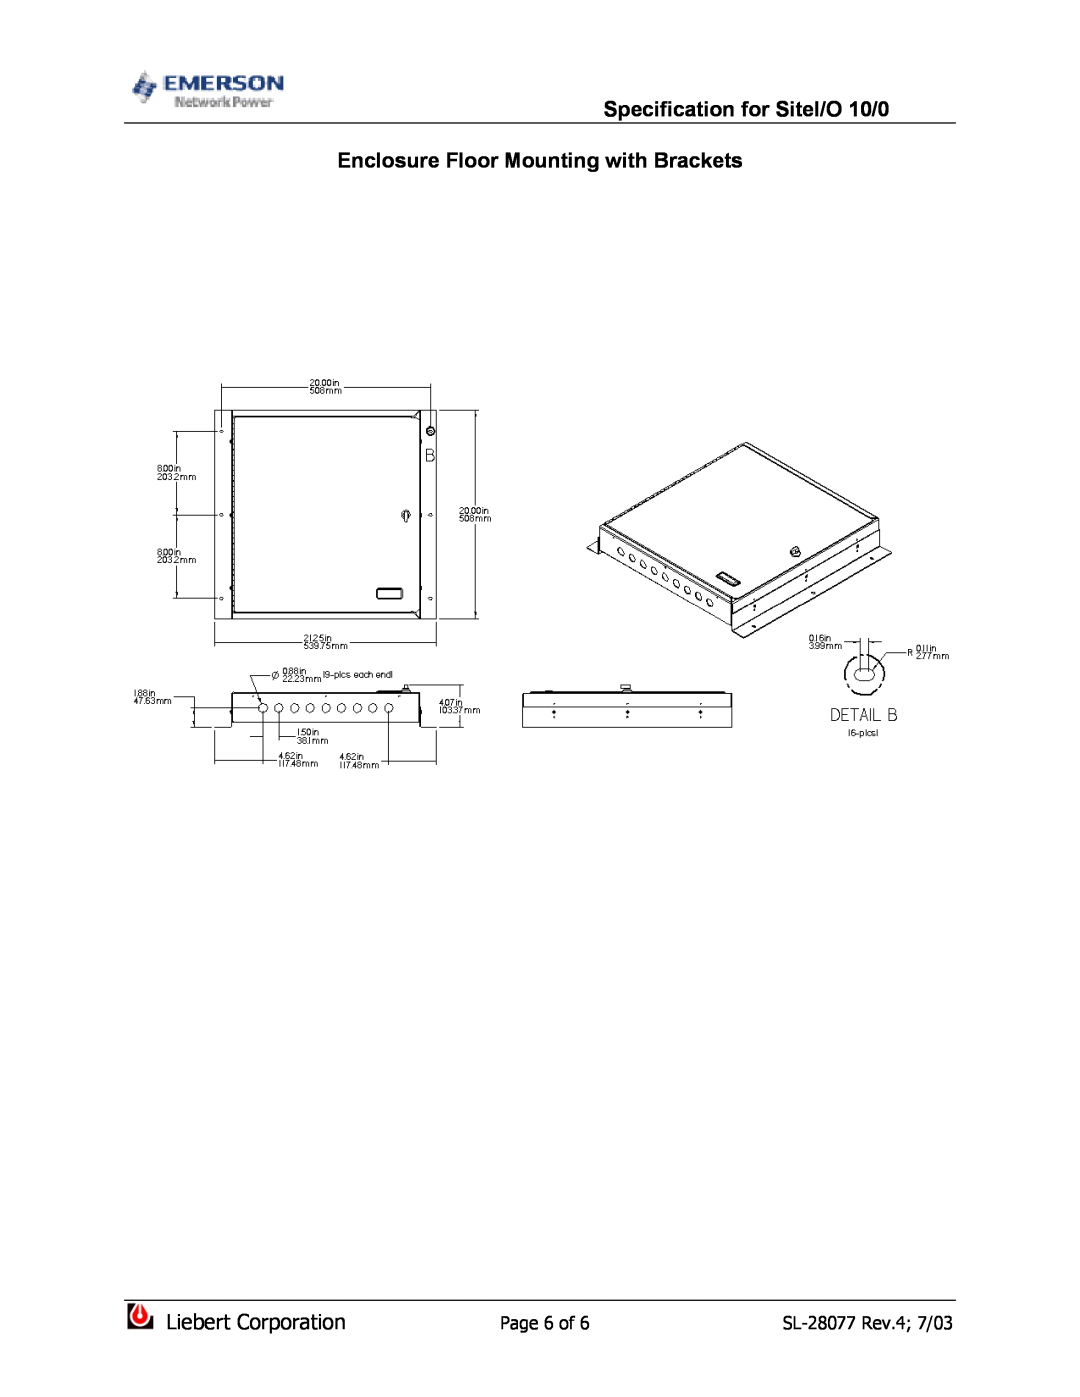 Emerson Enclosure Floor Mounting with Brackets, Page 6 of, Specification for SiteI/O 10/0, Liebert Corporation 